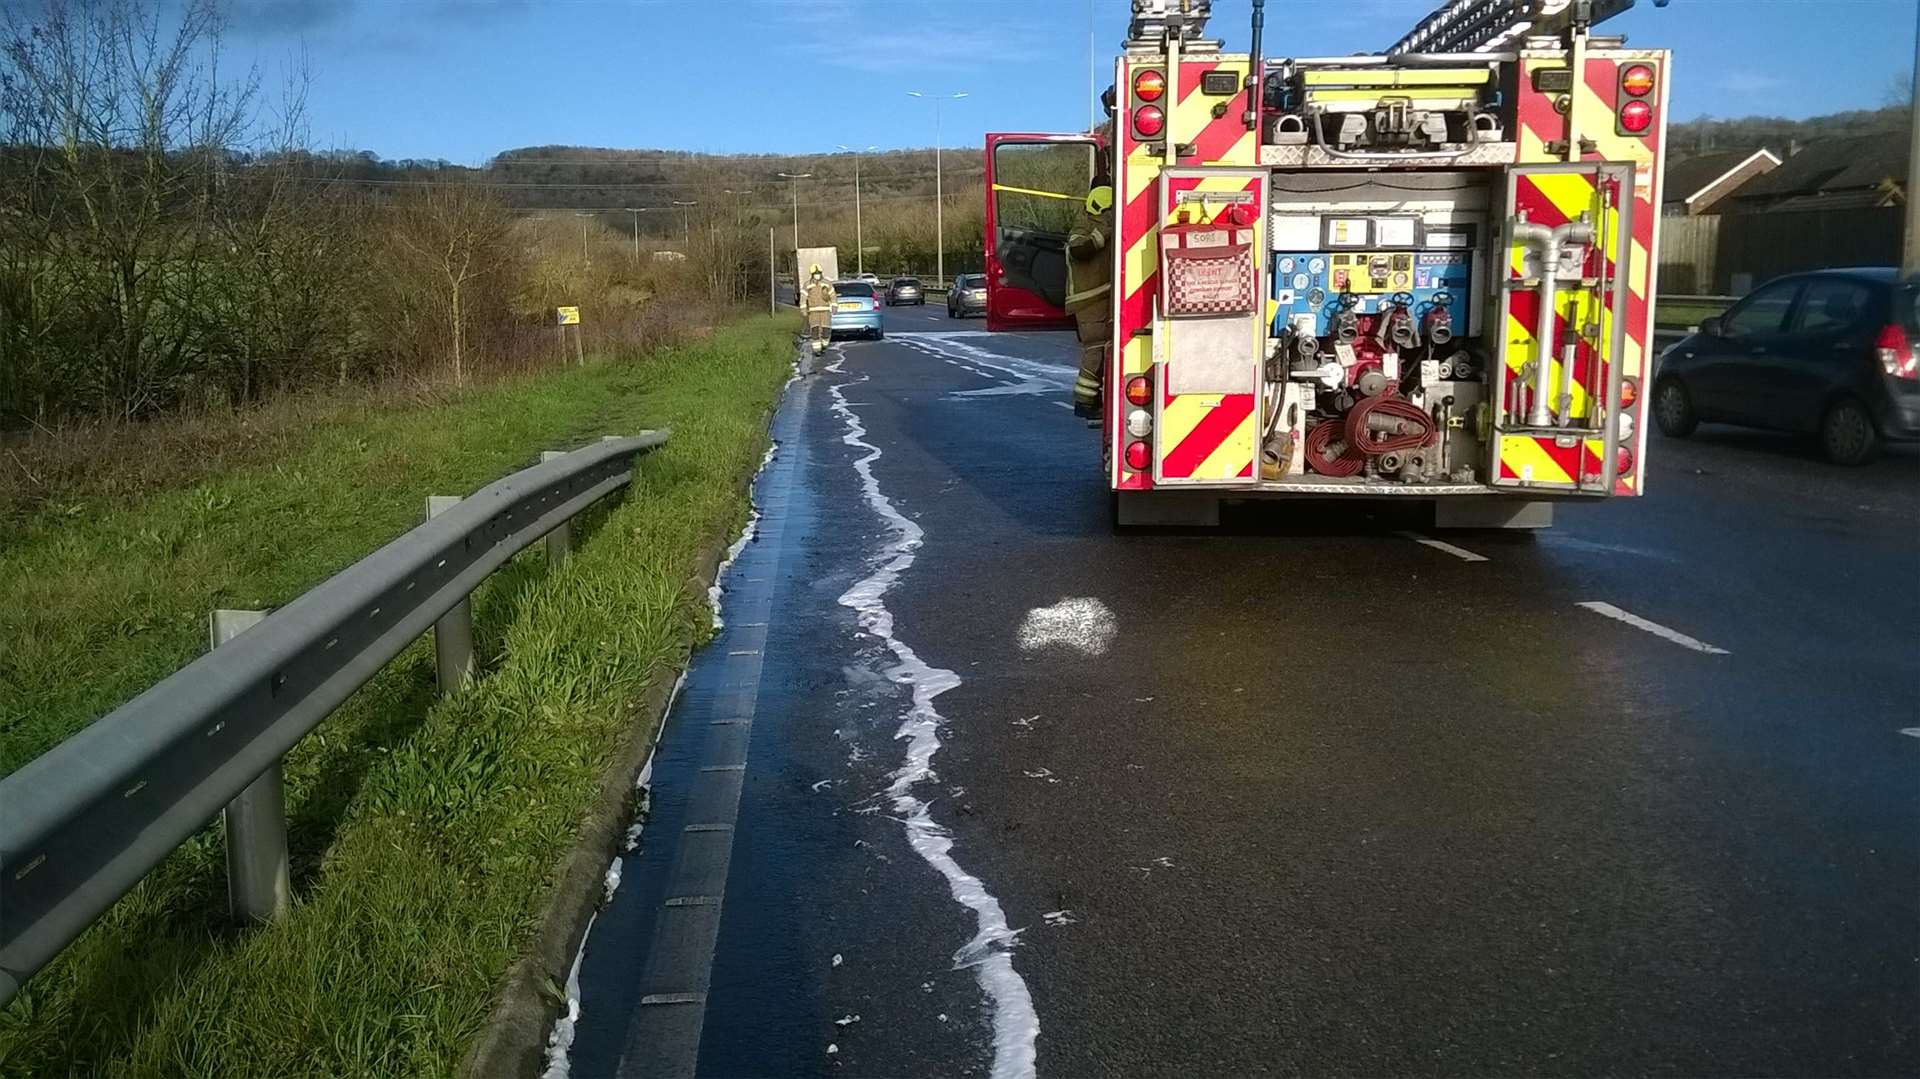 The fire service and police were called to the scene